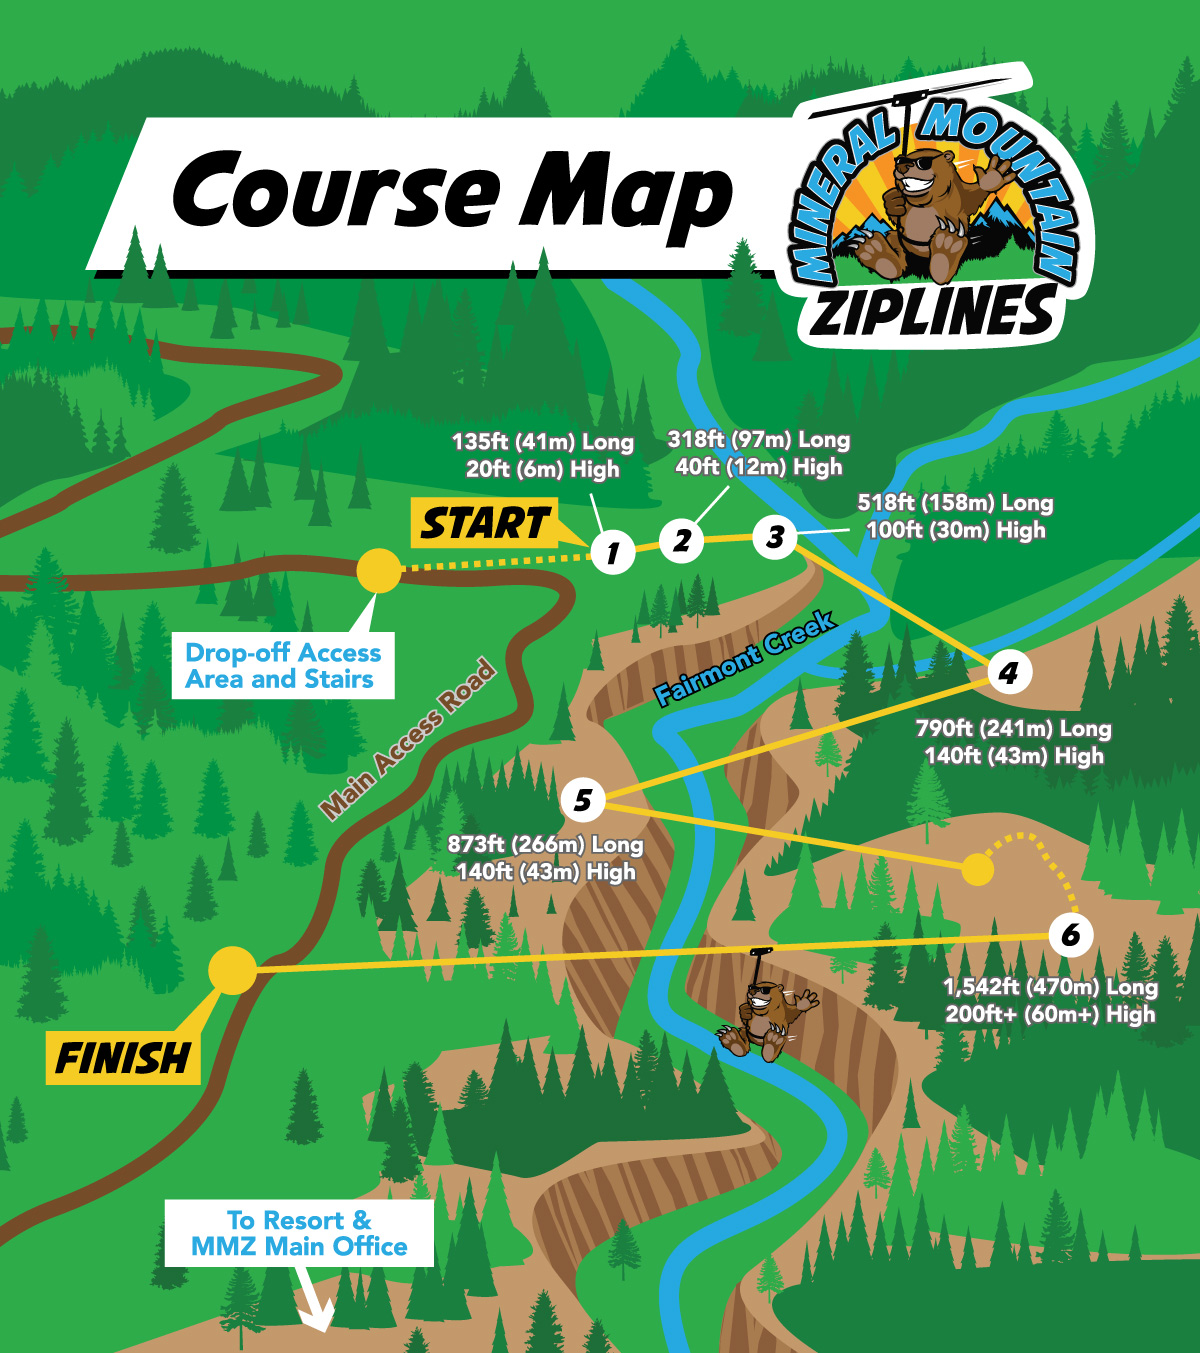 Mineral Mountain Ziplines at Fairmont Hot Springs Course Map